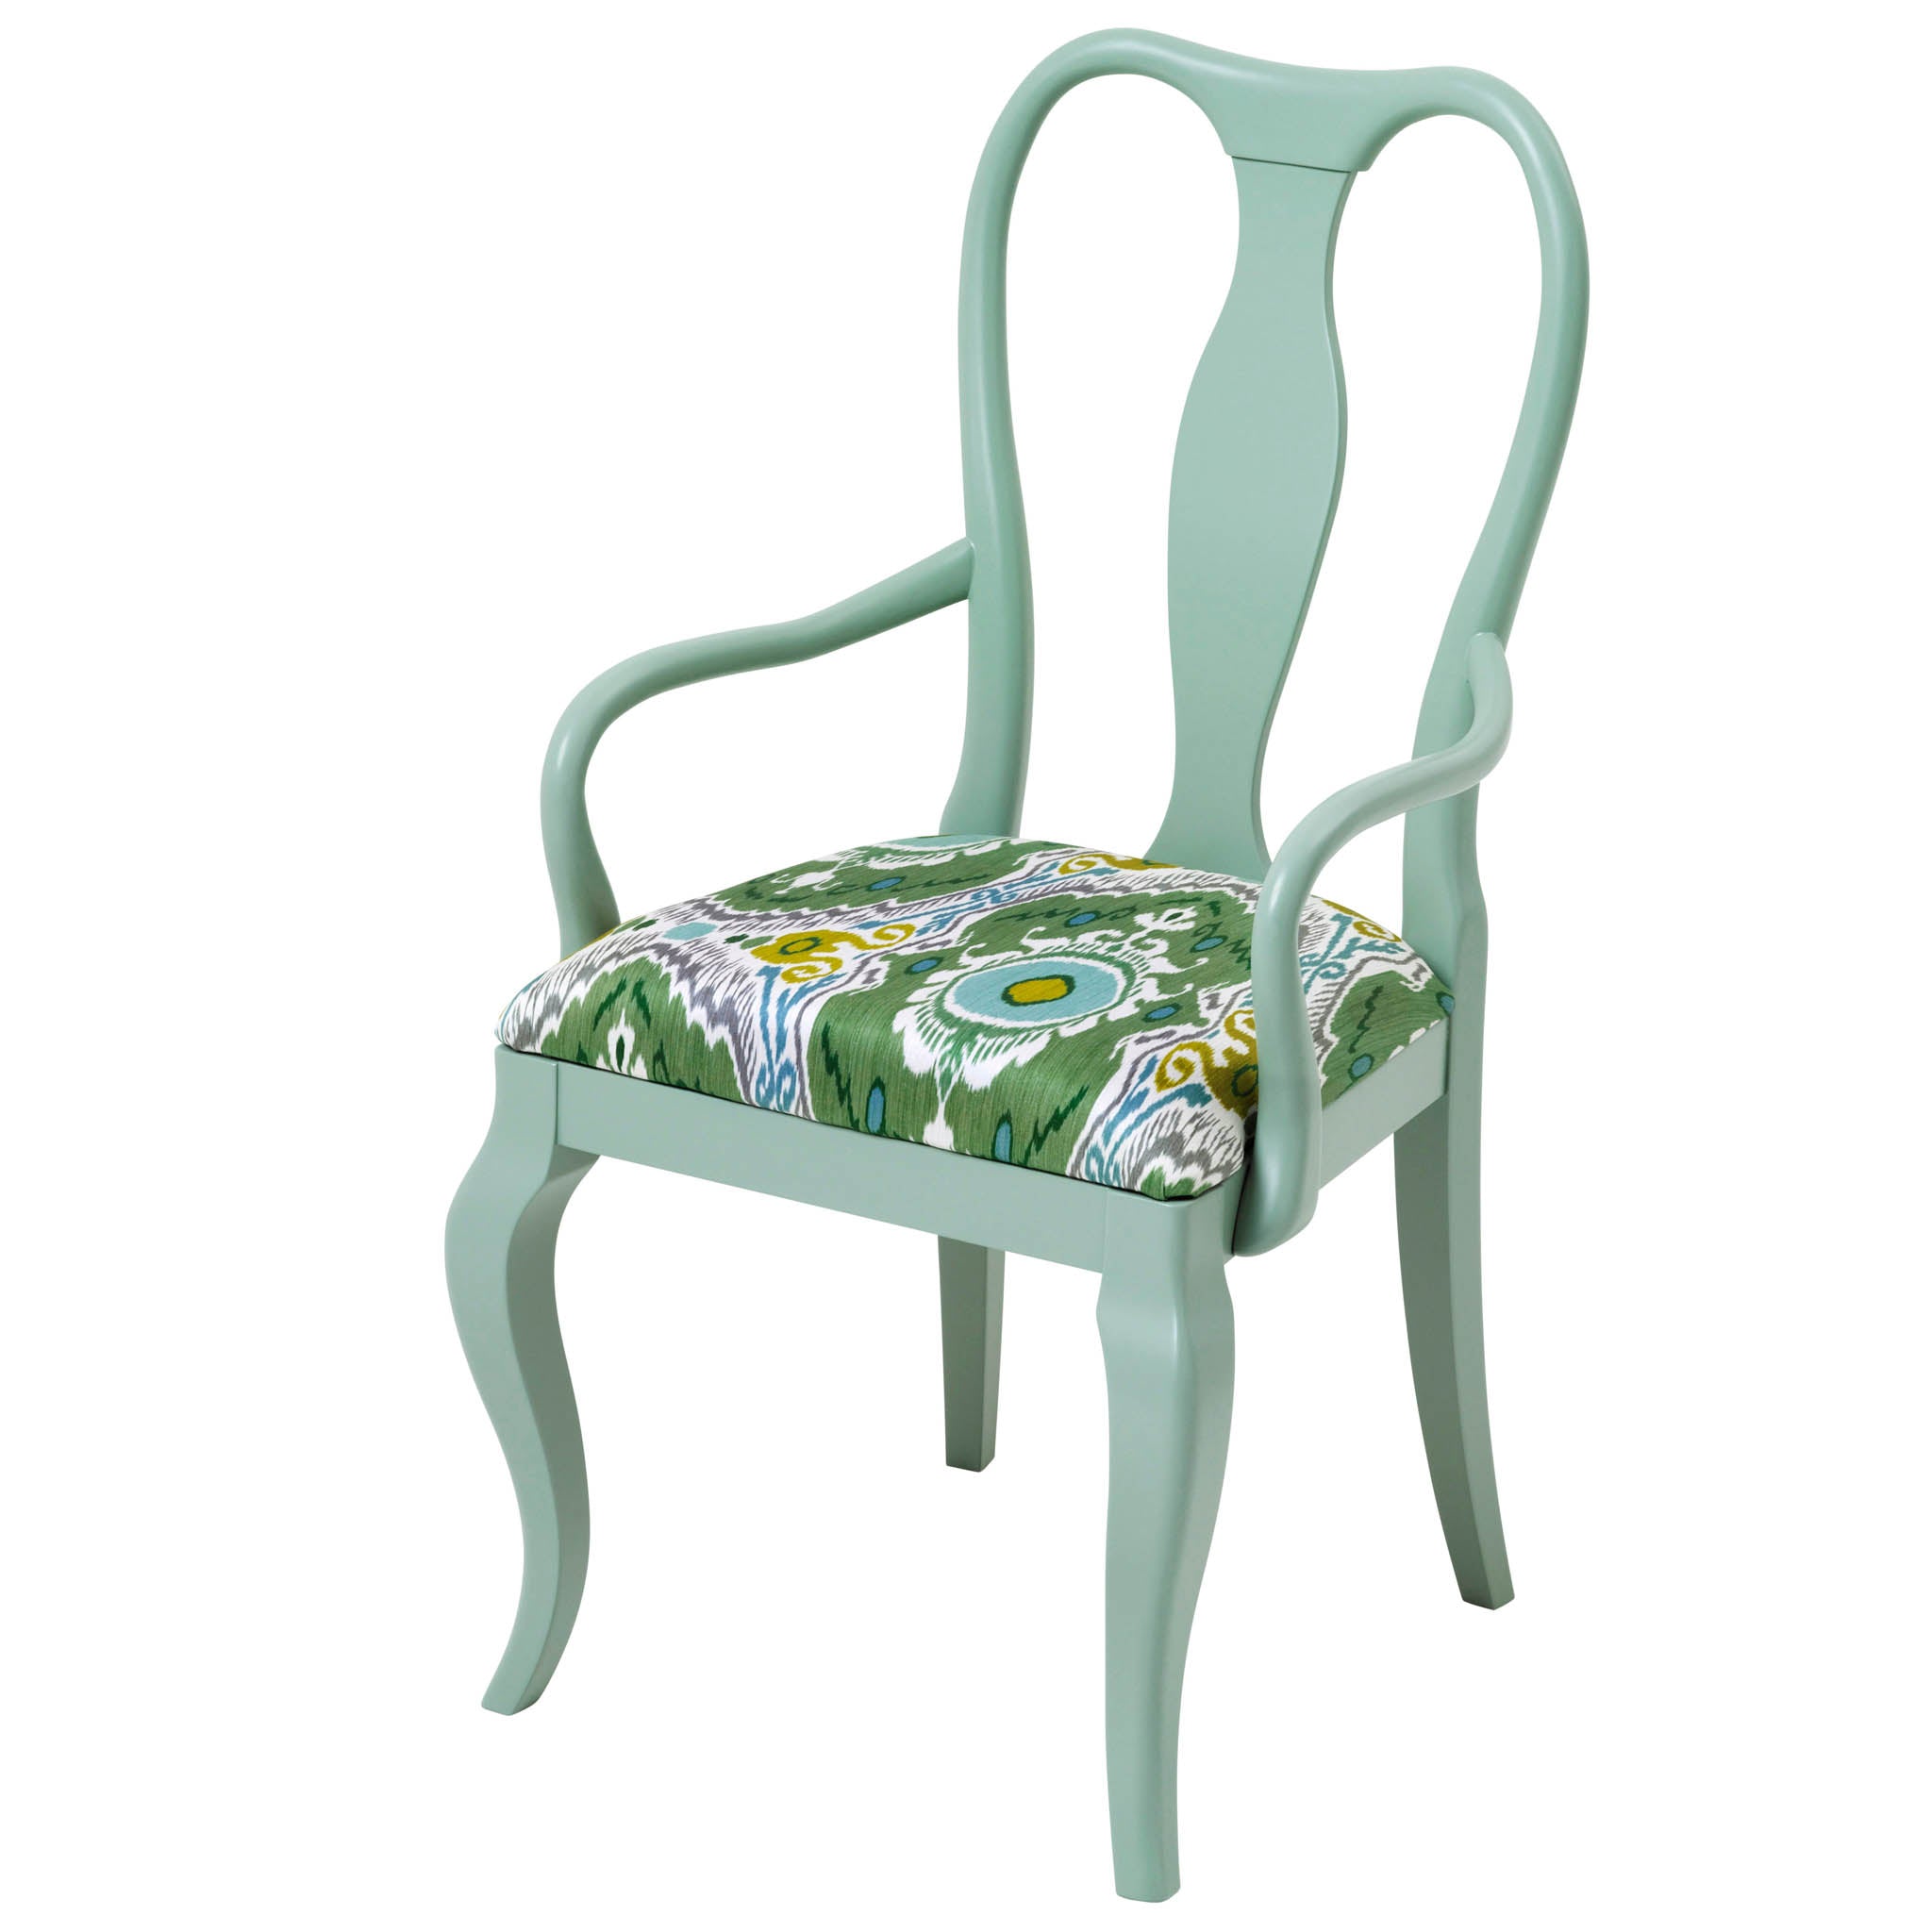 Marco Chair upholstered in Niyali in Nettle from Sanderson